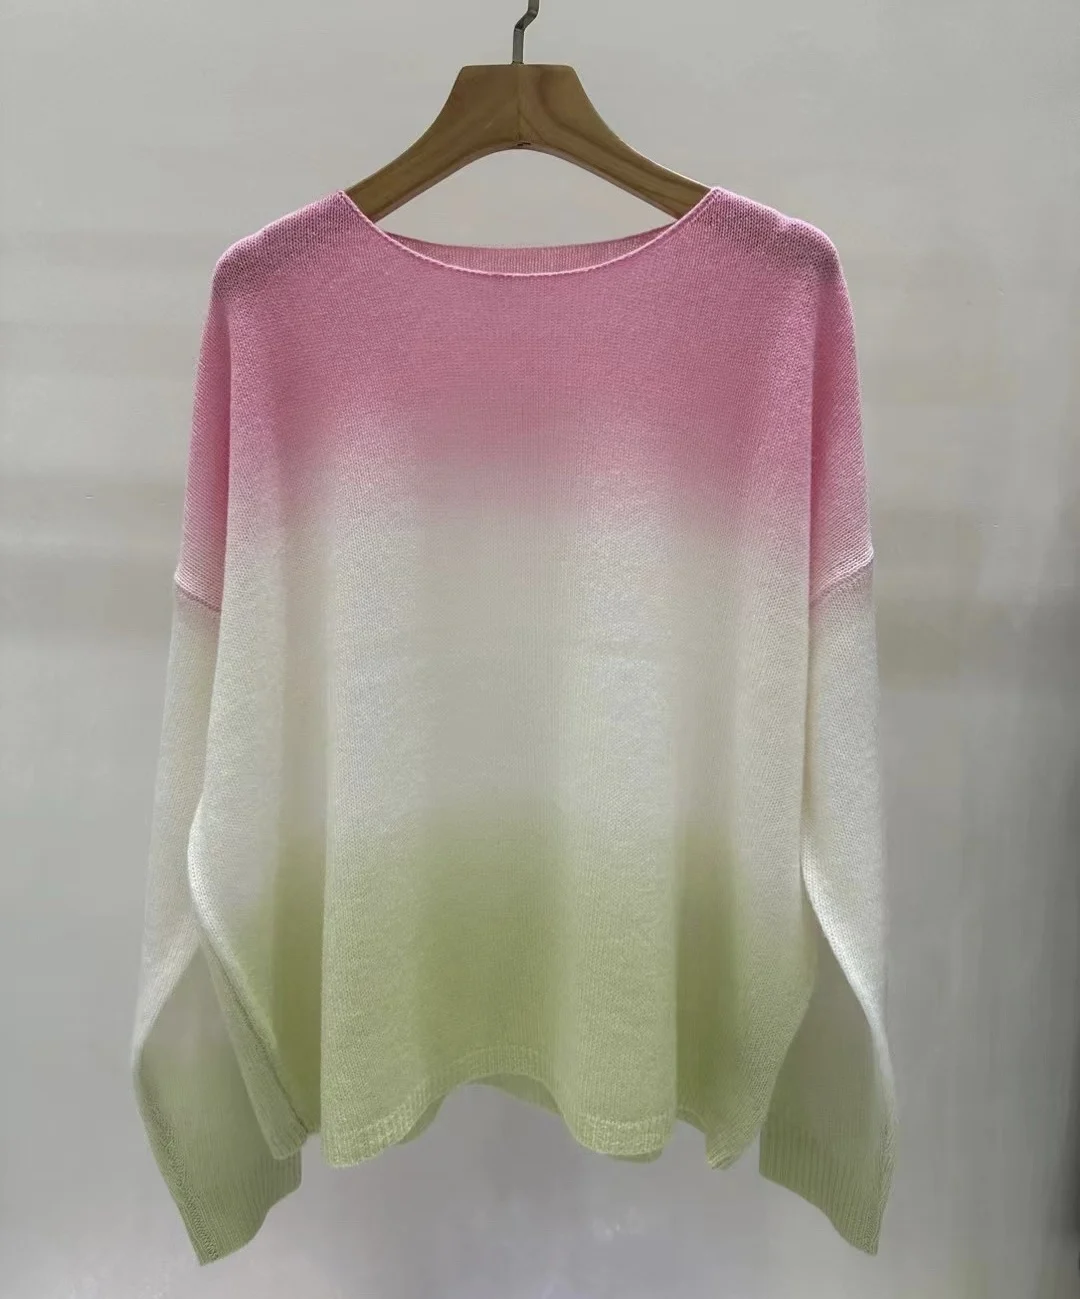 

2023 Autumn/Winter new, 100% cashmere, gradient color tie-dye extreme skinny pullover top,